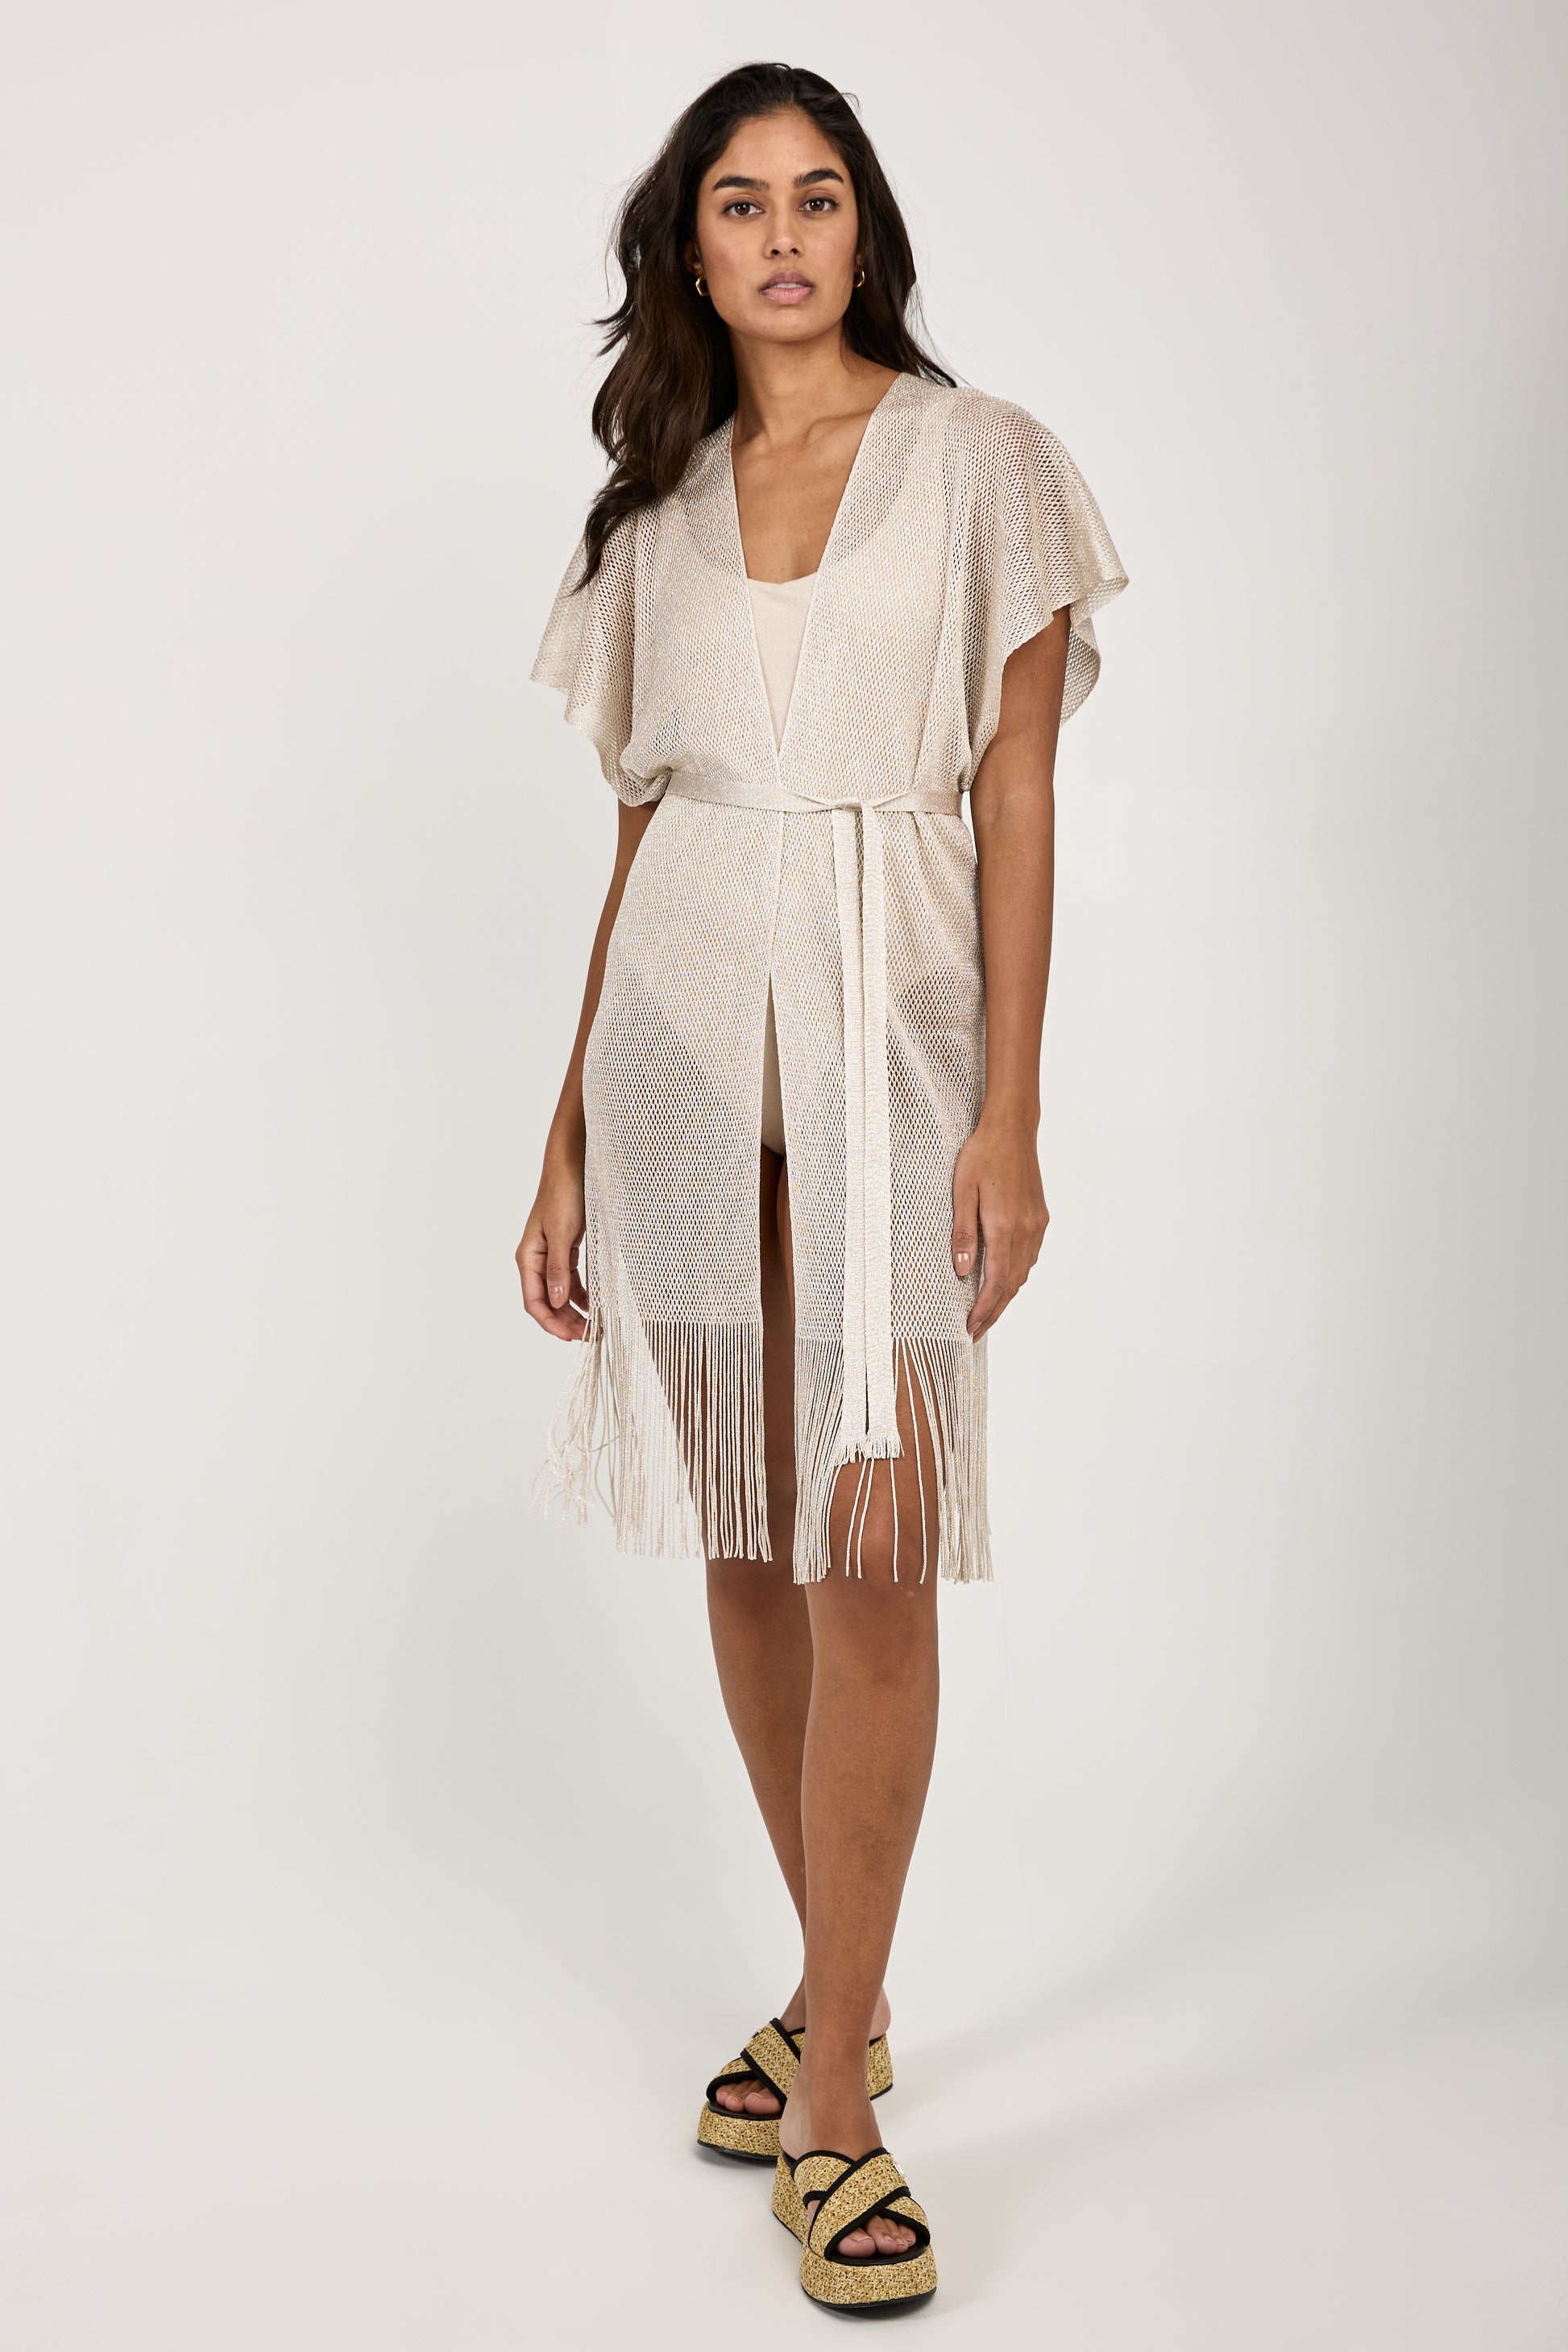 MAX MARA LEISURE Iacopo Knit Cover-up in Platinum